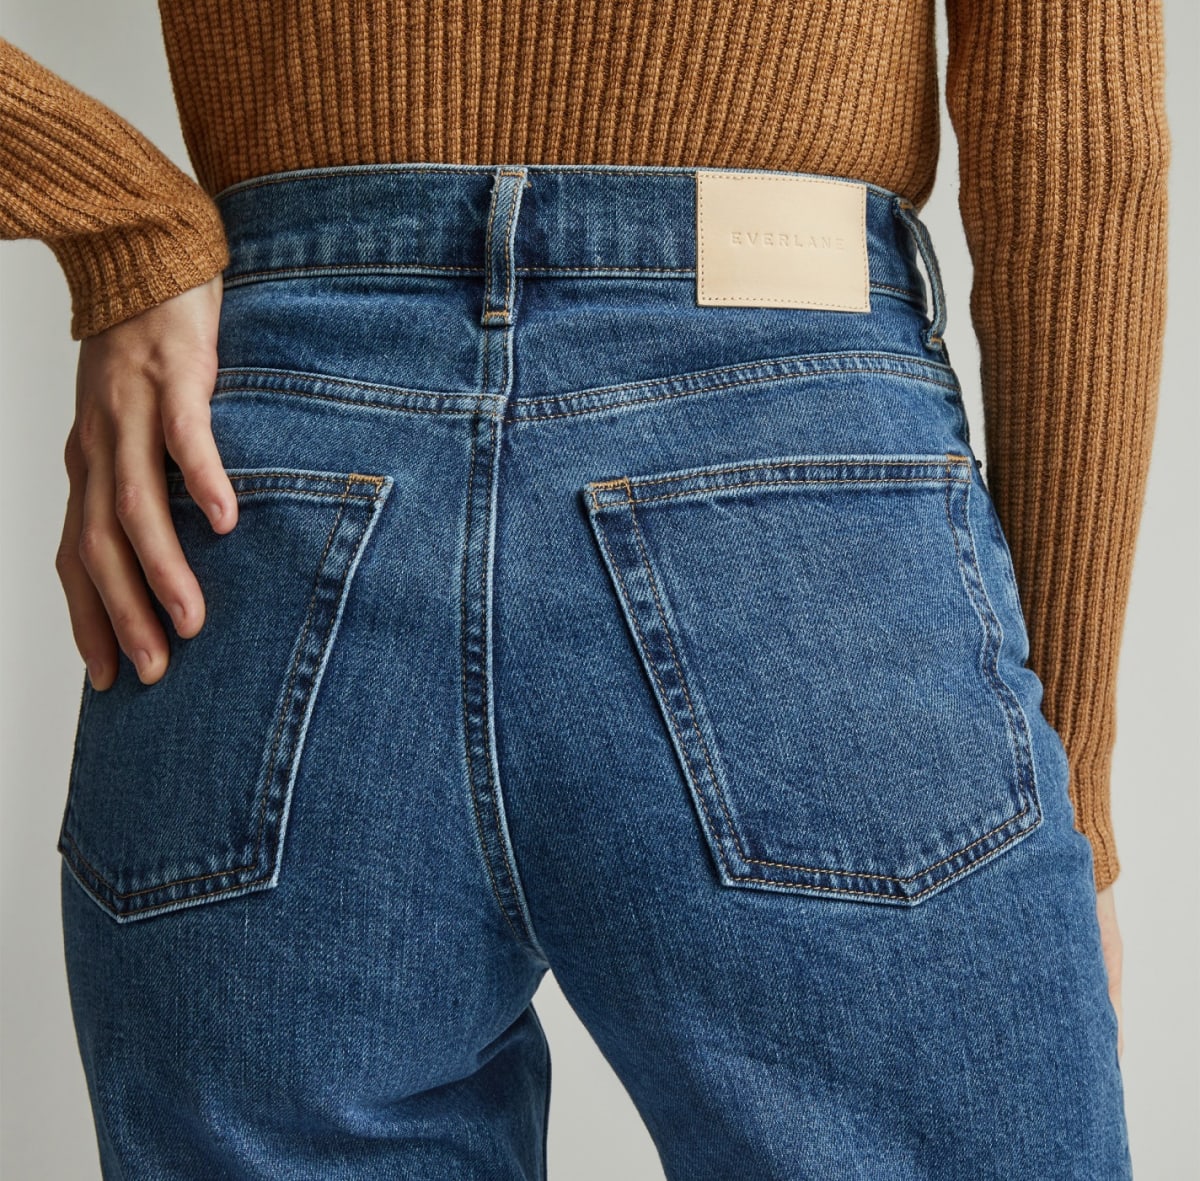 Are Everlane Jeans Worth it? A Denim Guide to Every Style